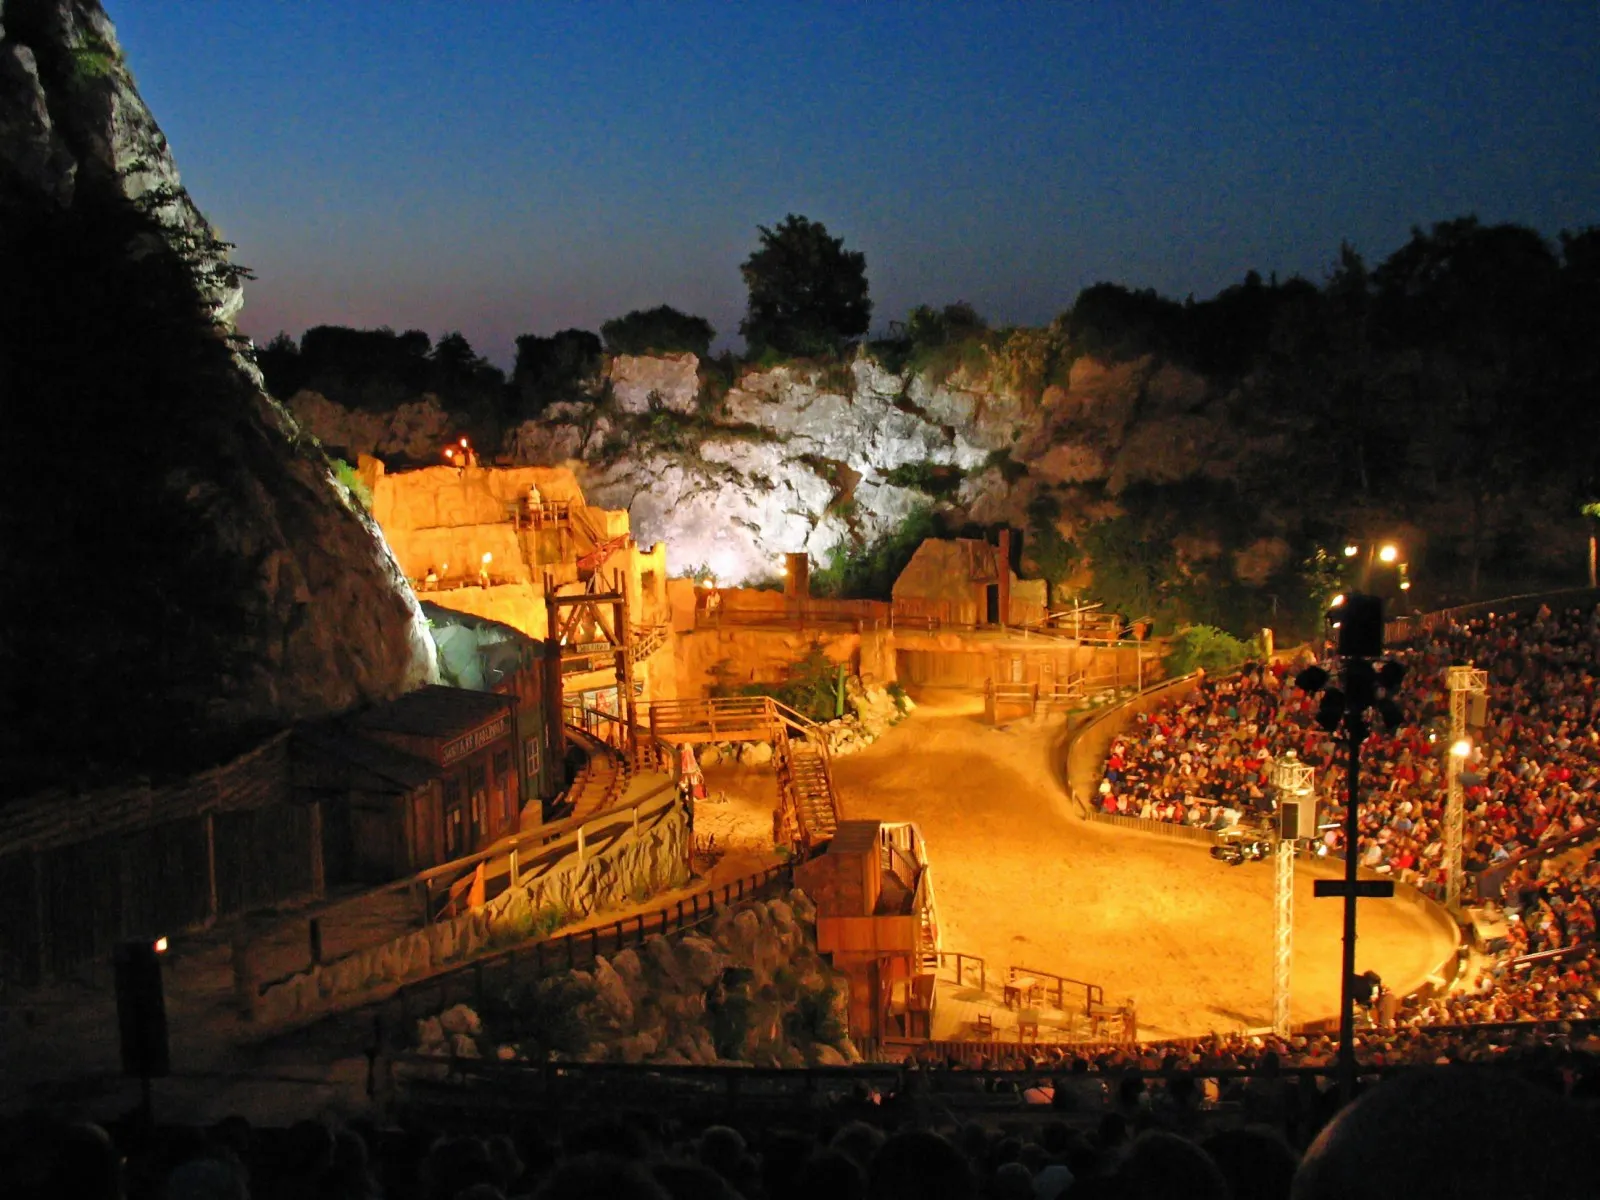 Photo showing: Twilight during a perfomance at the Karl-May-Spiele (an open-air theatre) in Bad Segeberg, Germany